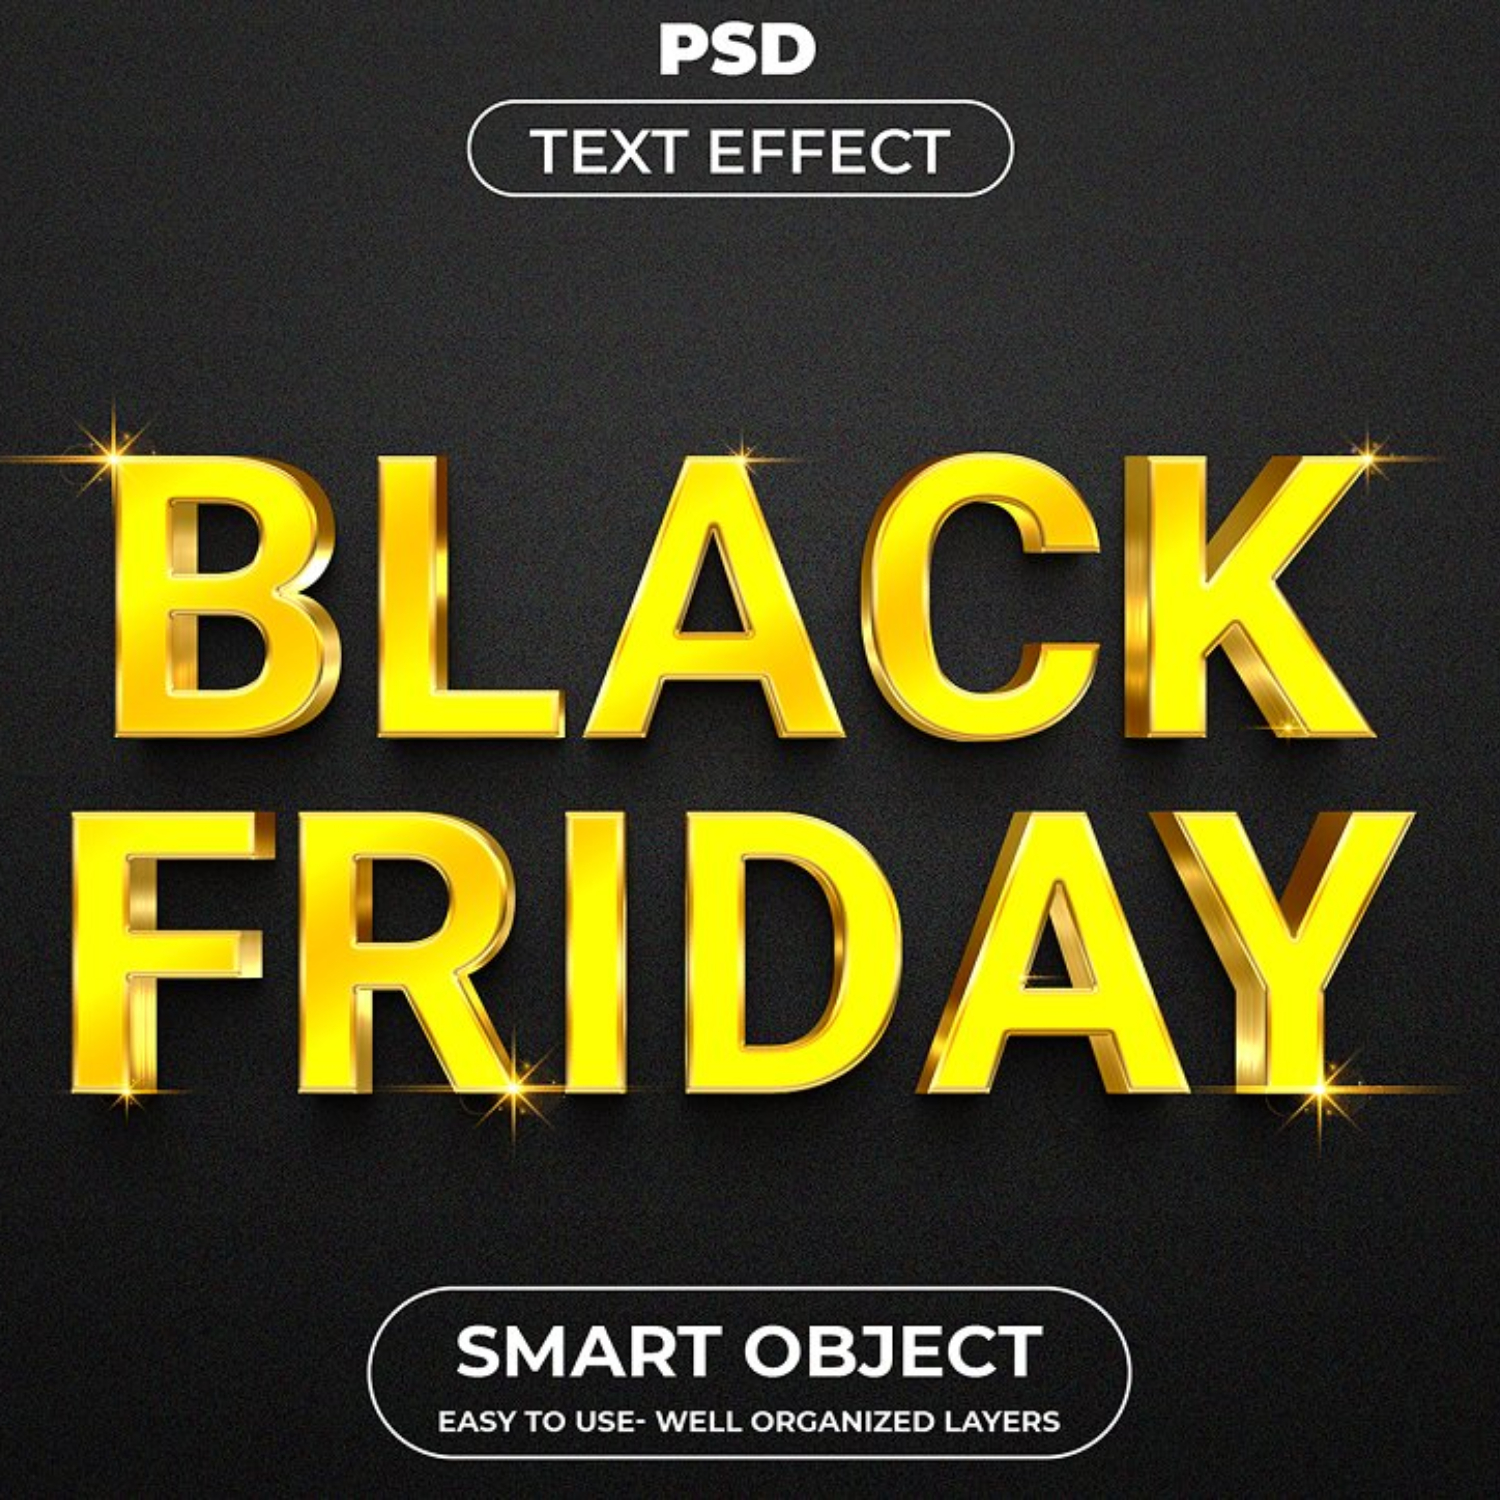 The text black friday on a black background.